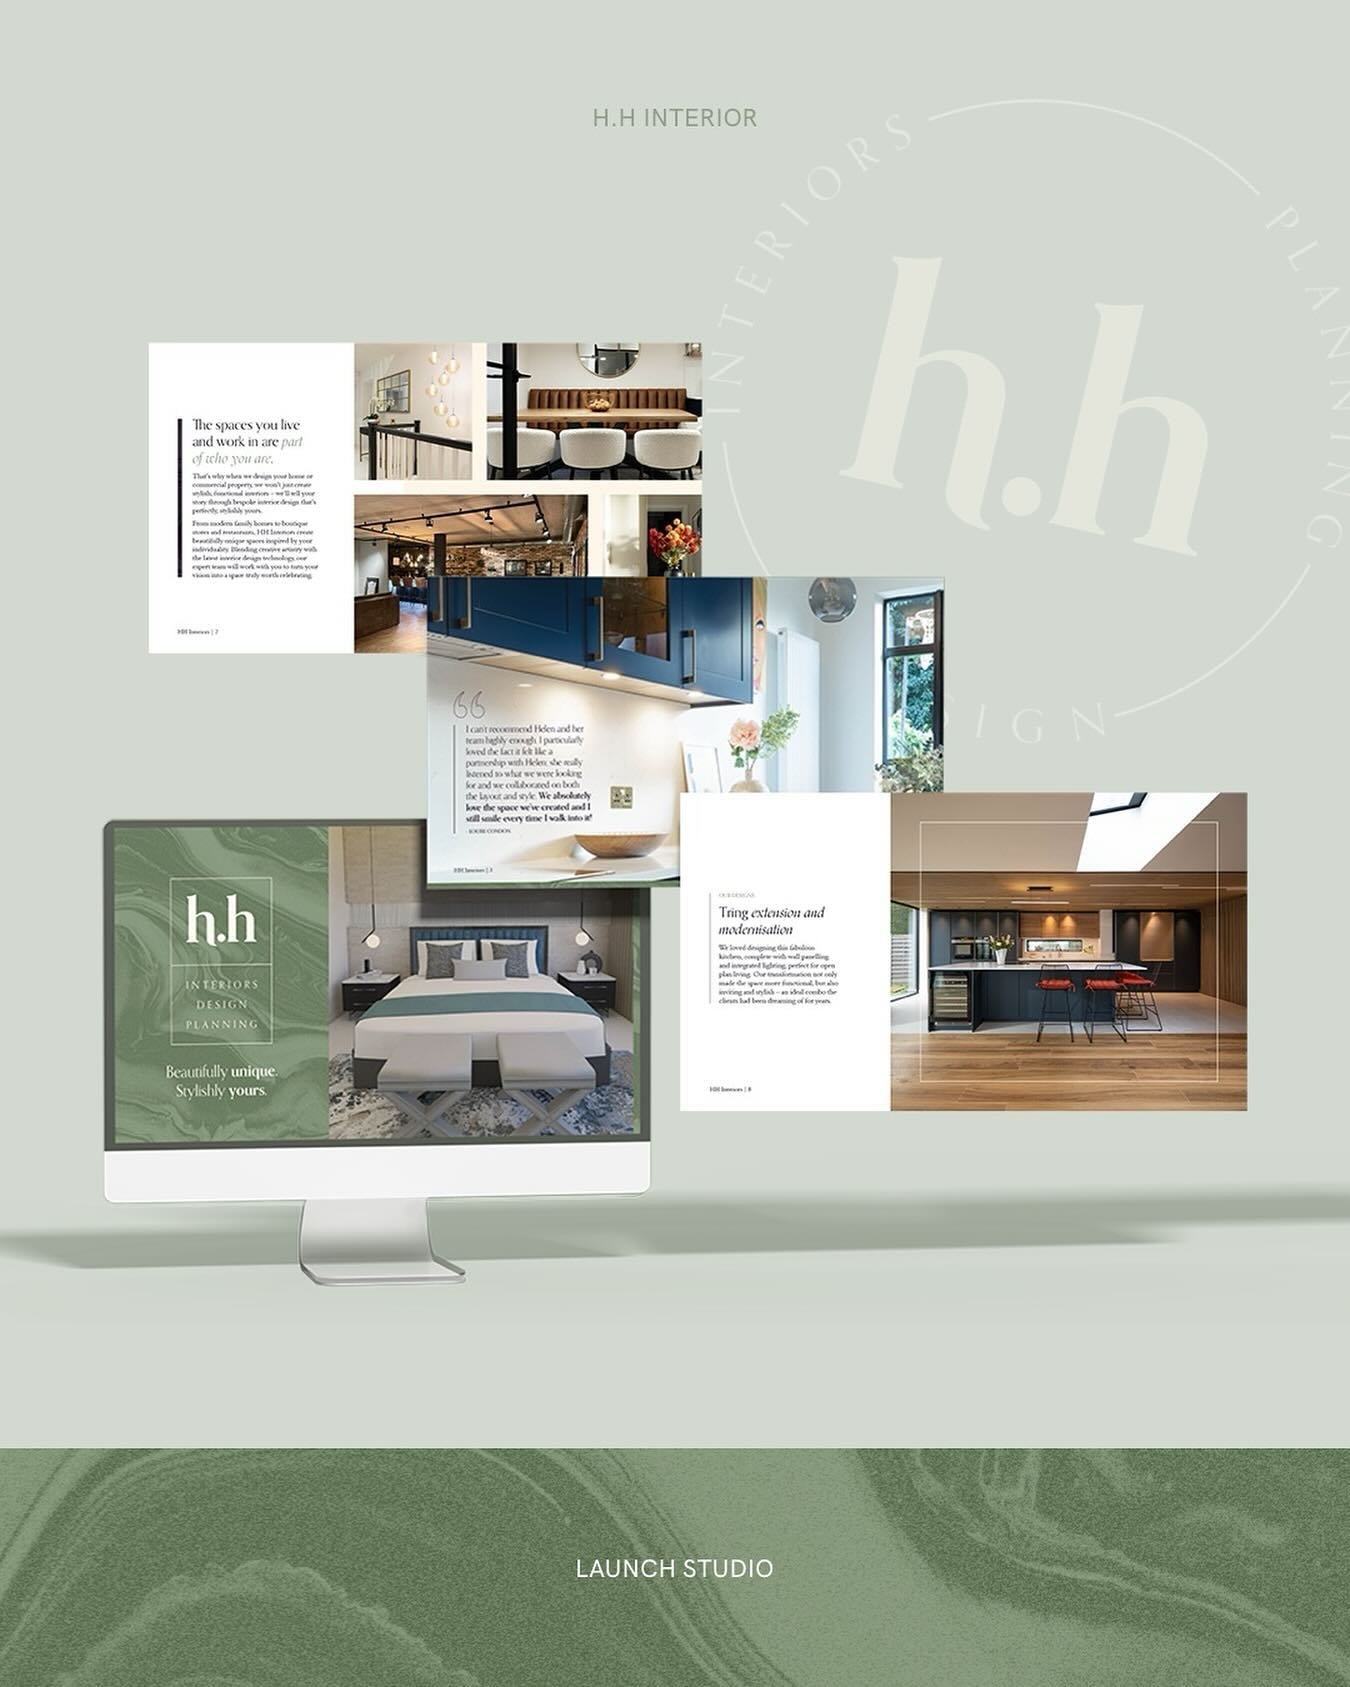 Digital brochures are becoming more and more popular due to their ability to create a more interactive experience for the user, as well as being easily shareable and have the ability to be updated as many times as needed without incurring a huge prin